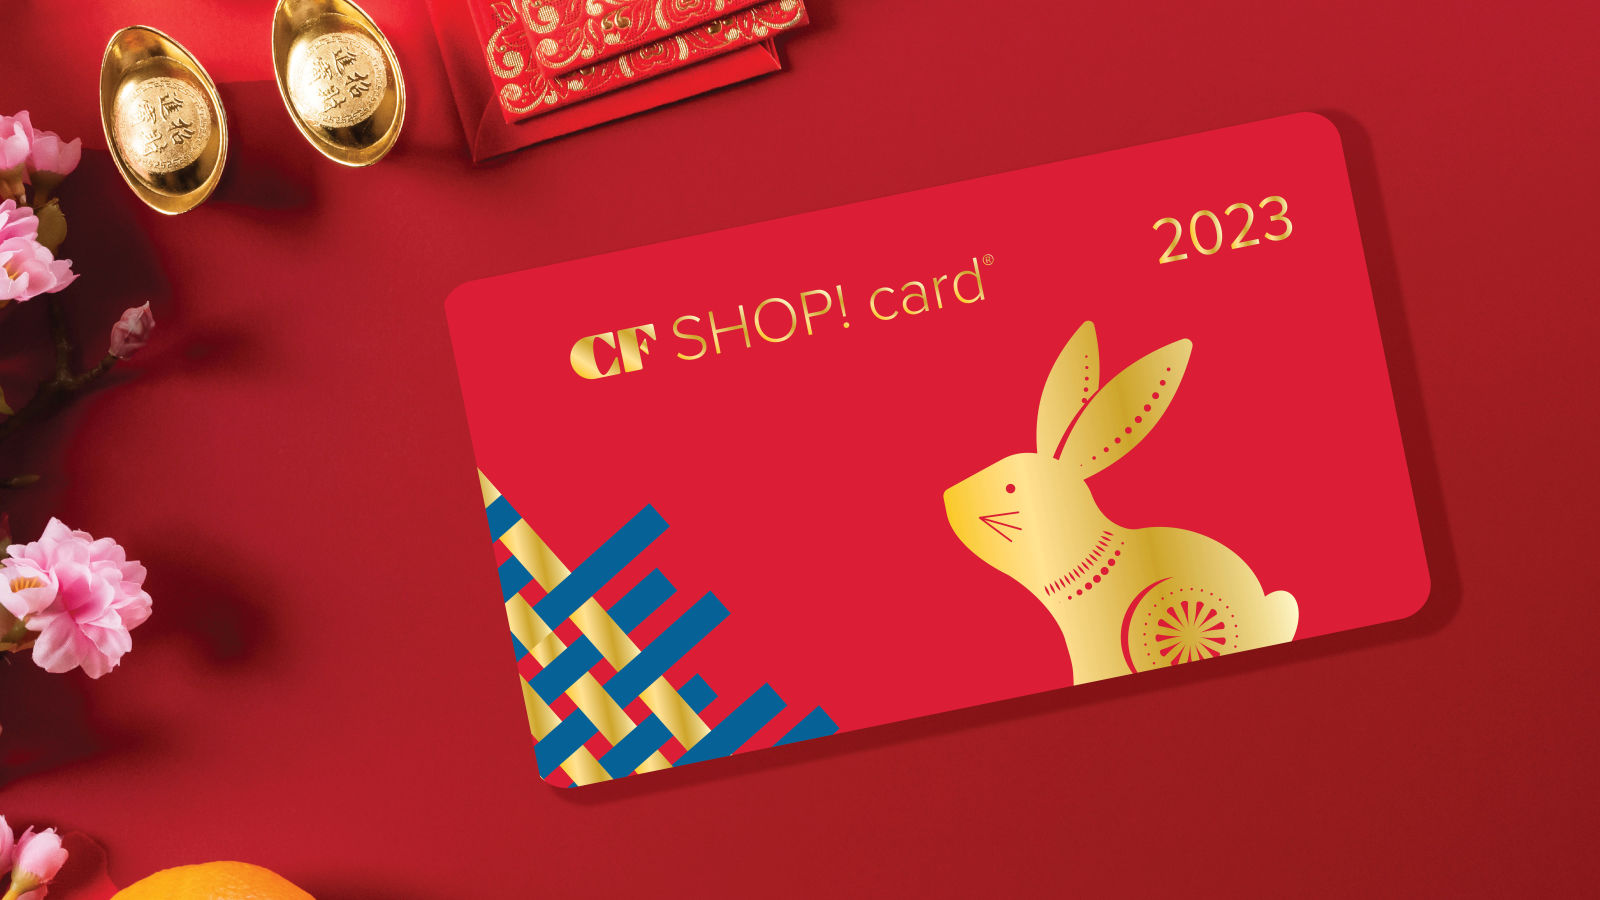 Celebrate Lunar New Year with a bonus gift card up to $328!